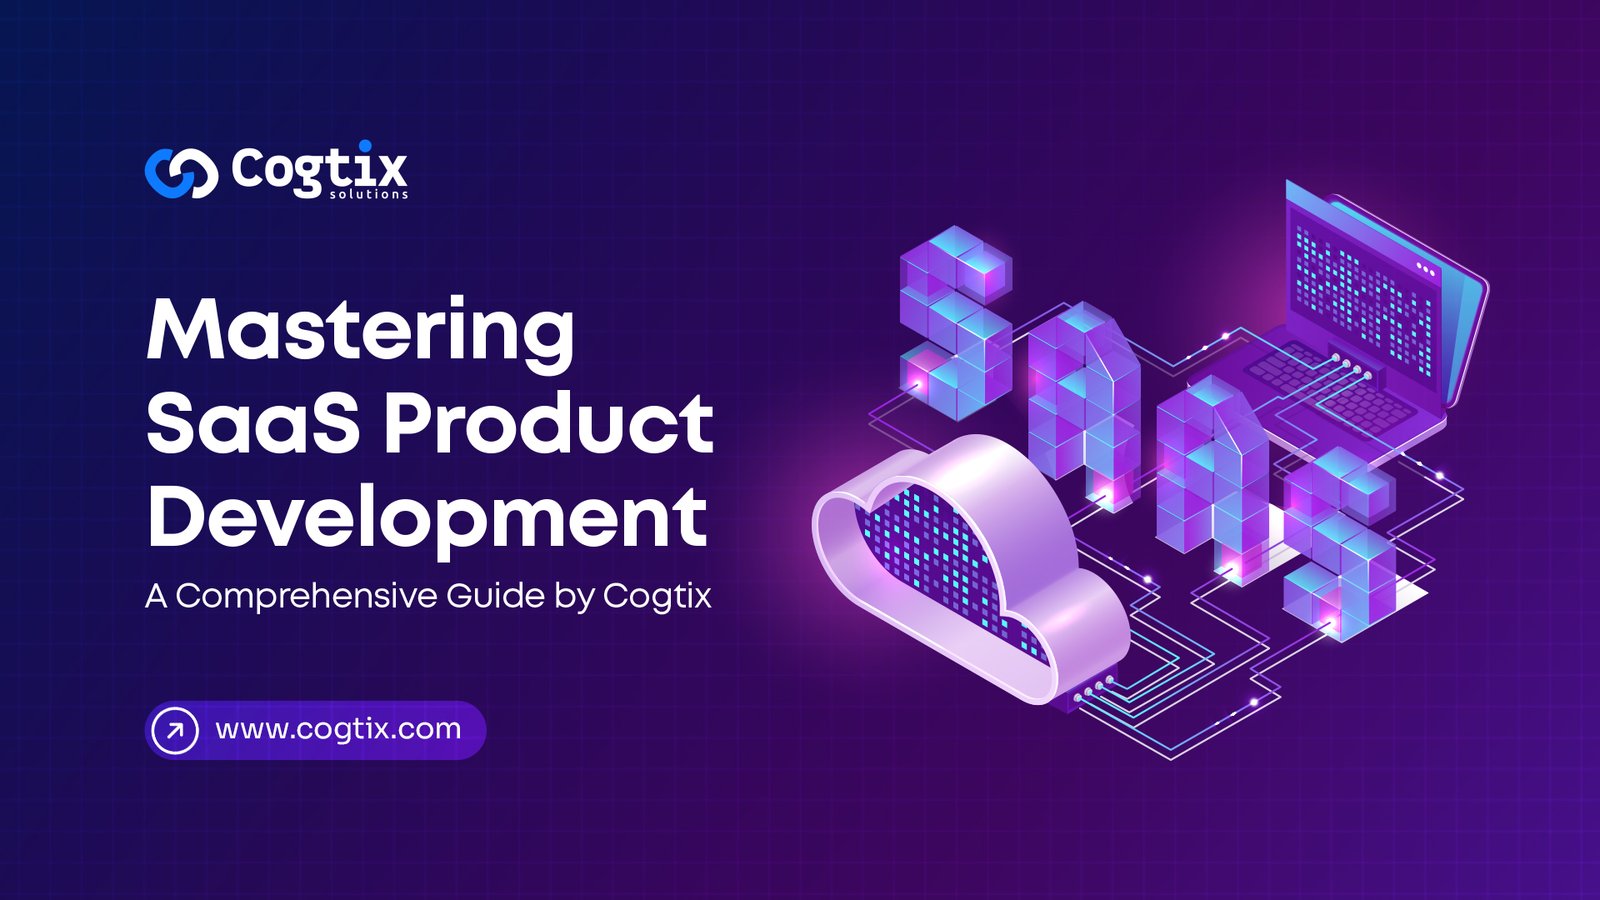 Mastering SaaS Product Development: A Comprehensive Guide by Cogtix